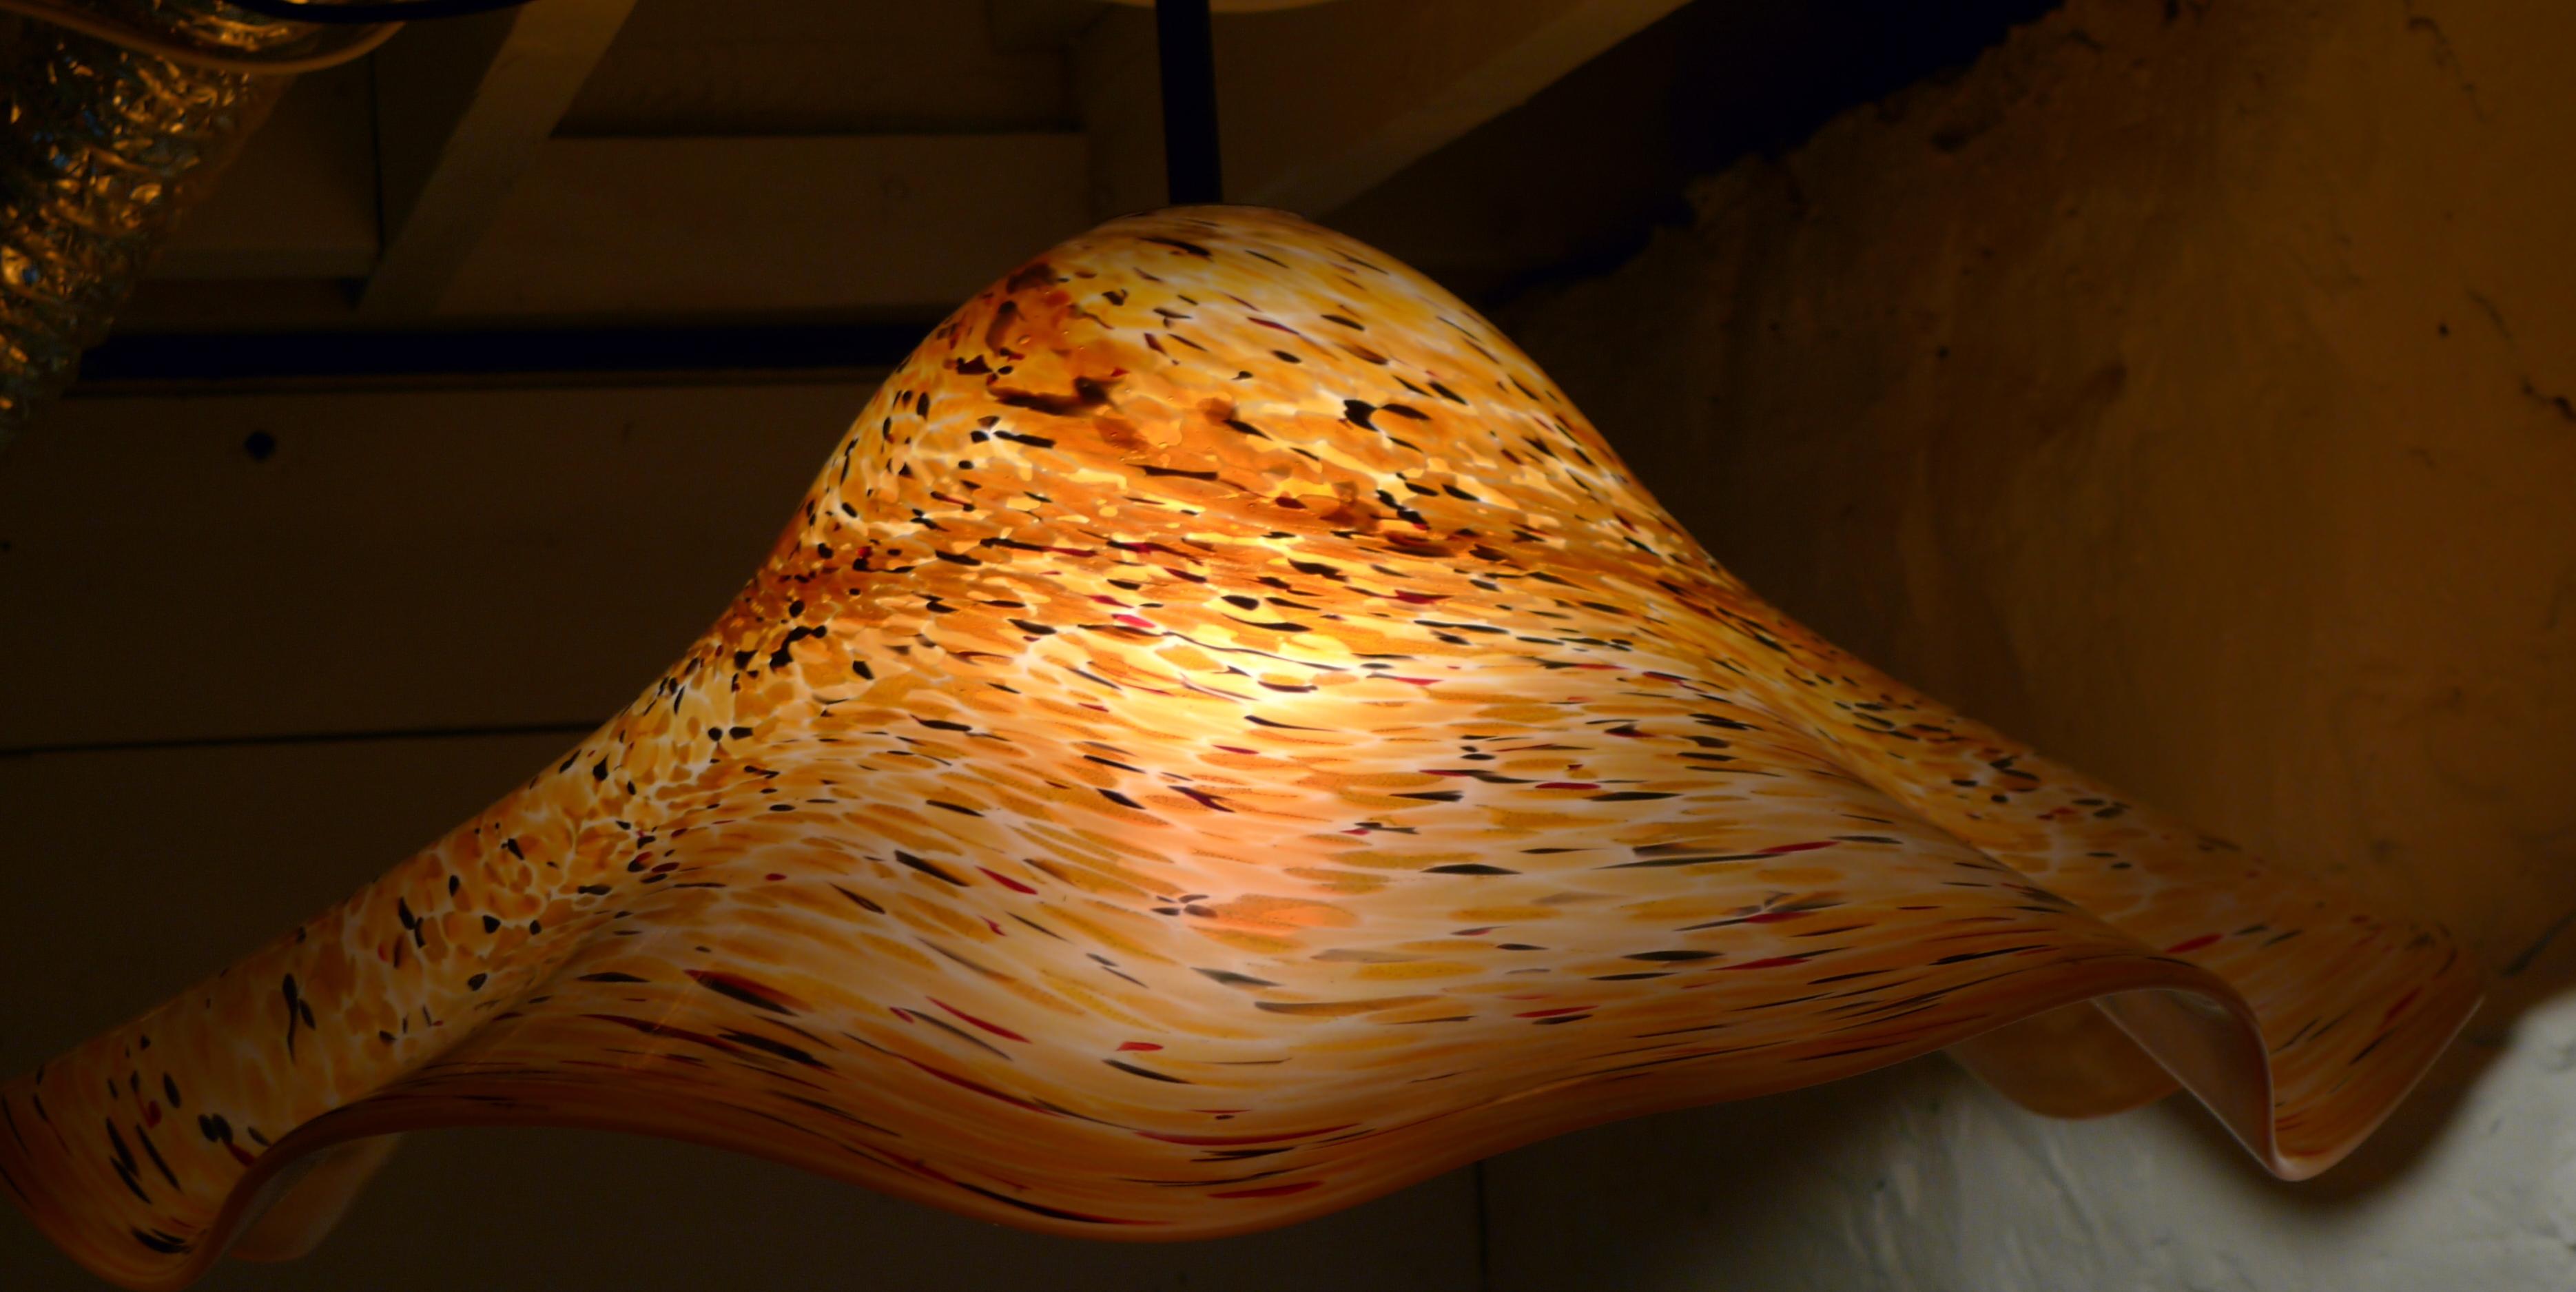 Mosaic Chandelier of Hand-Blown Murano Glass Signed by the Artist Studio, circa 1970s. For Sale